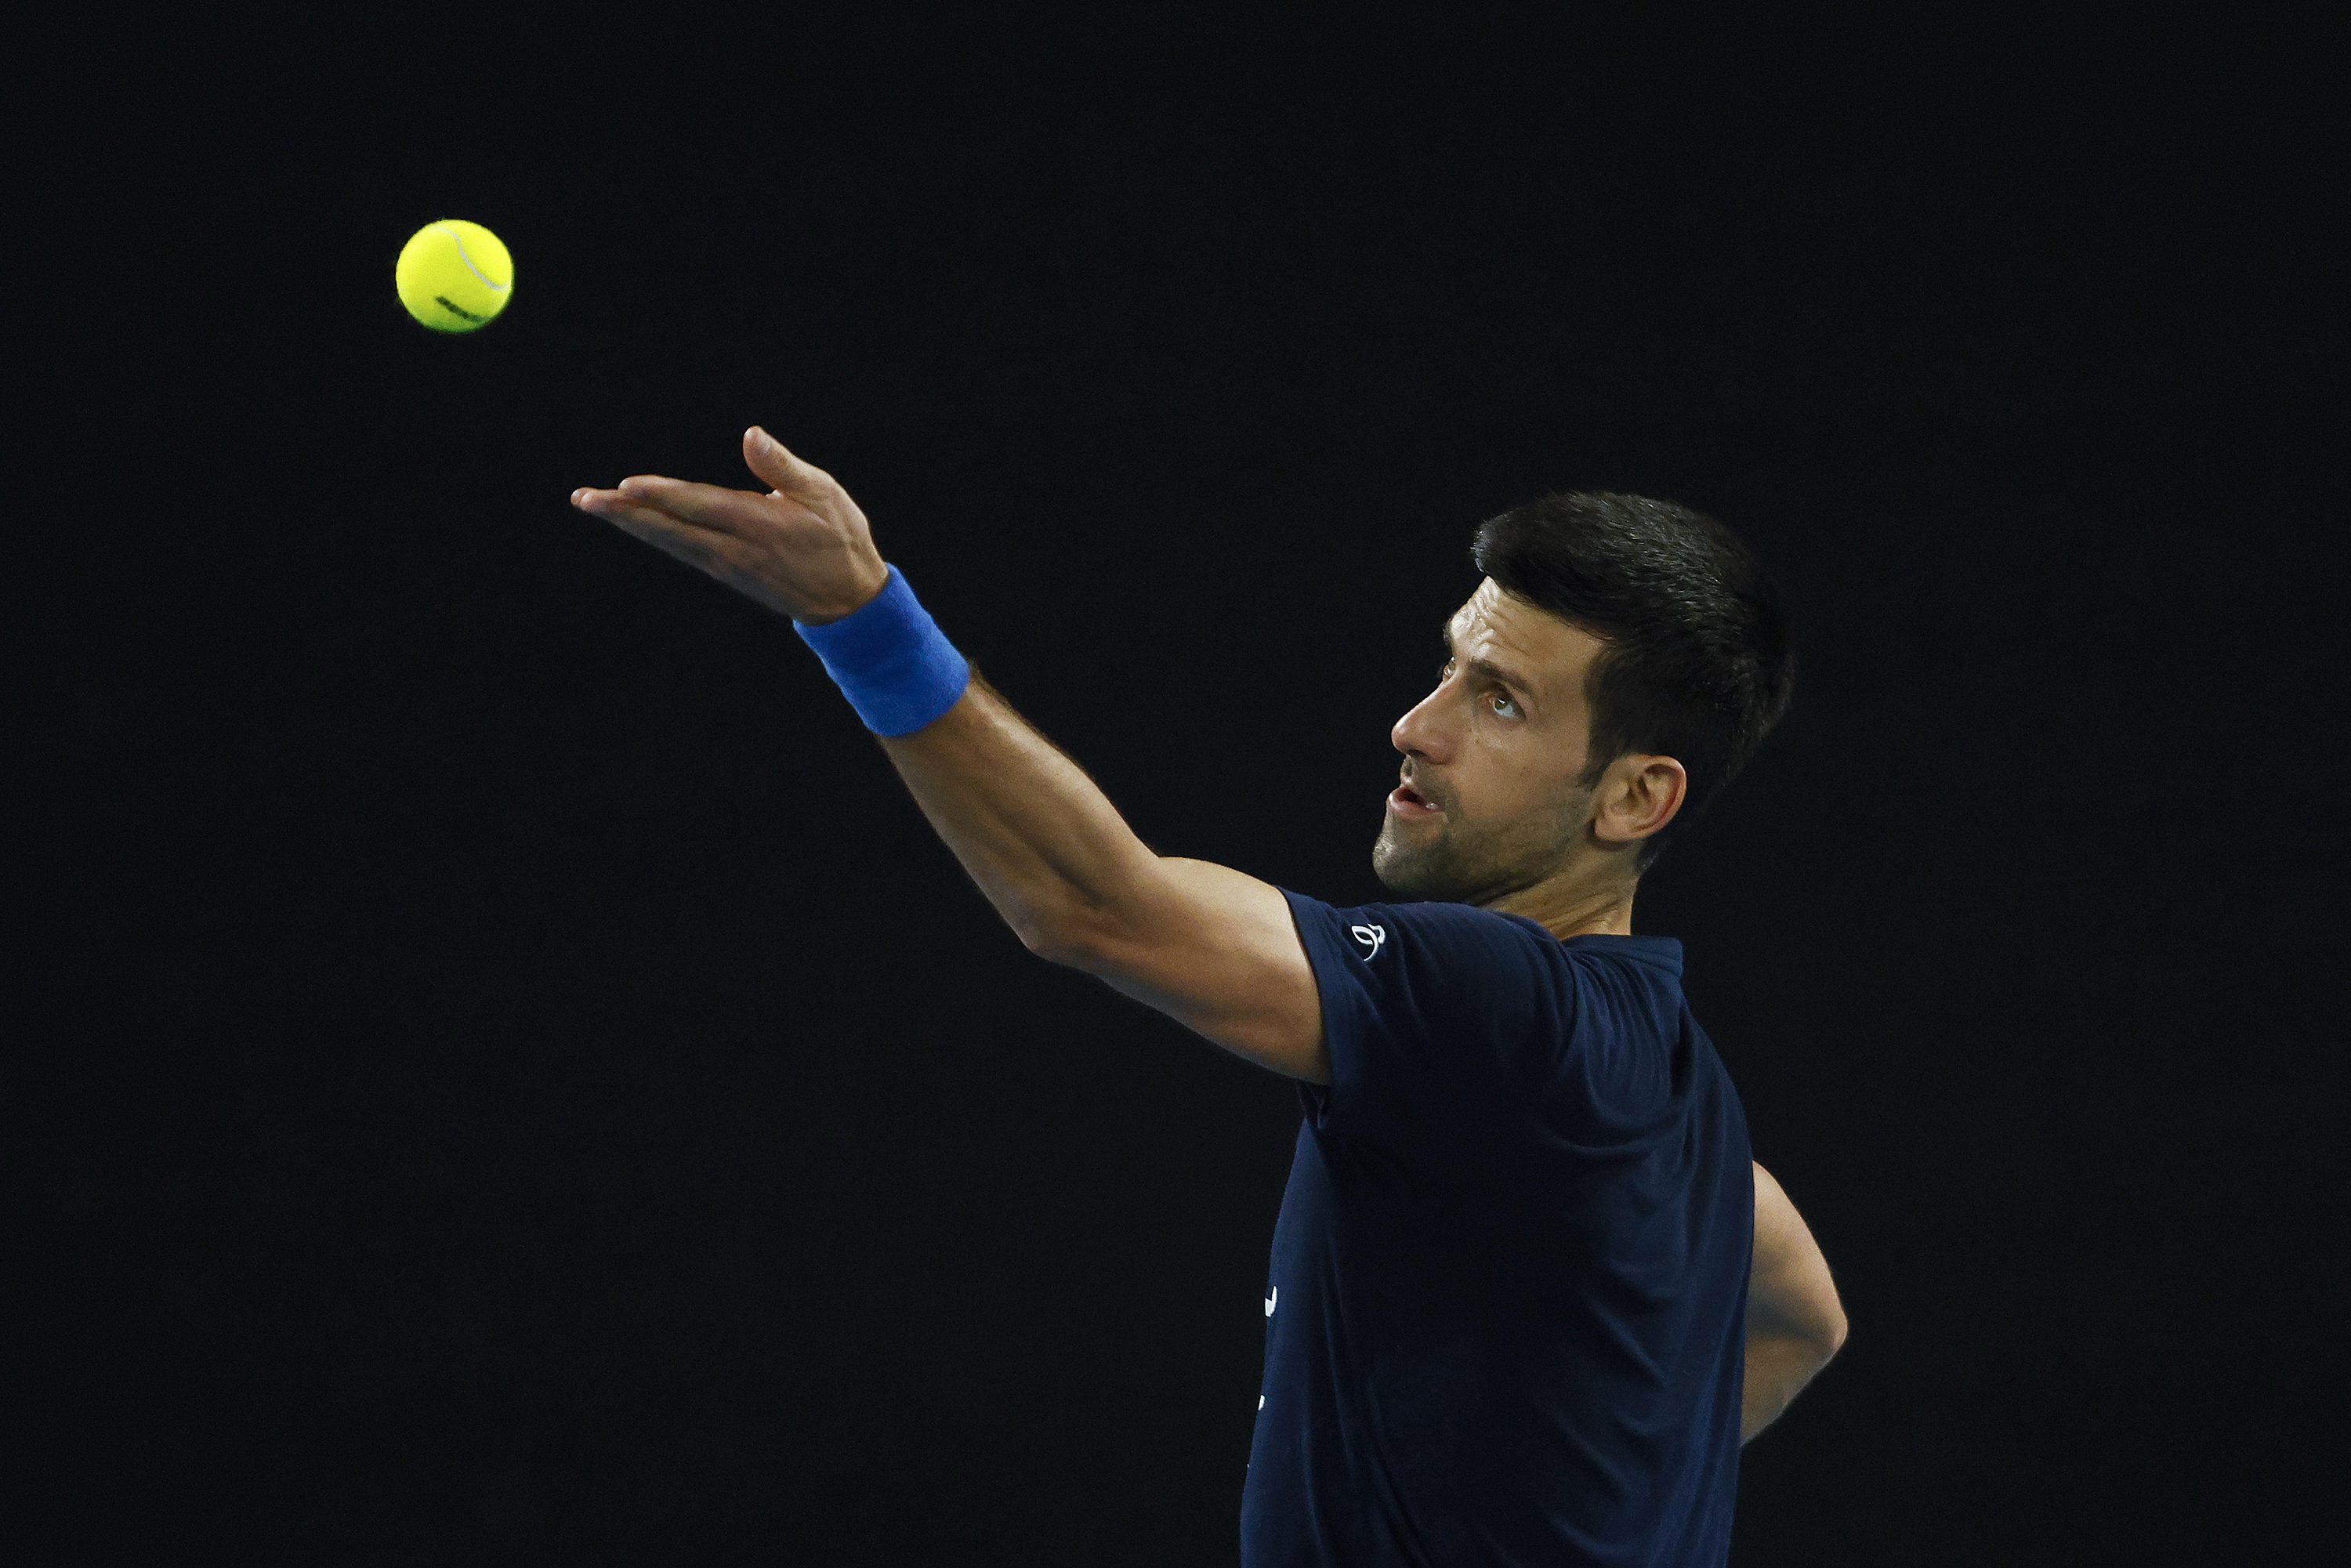 Novak Djokovic practiced at Melbourne Park on Friday before his visa was canceled for a second time.